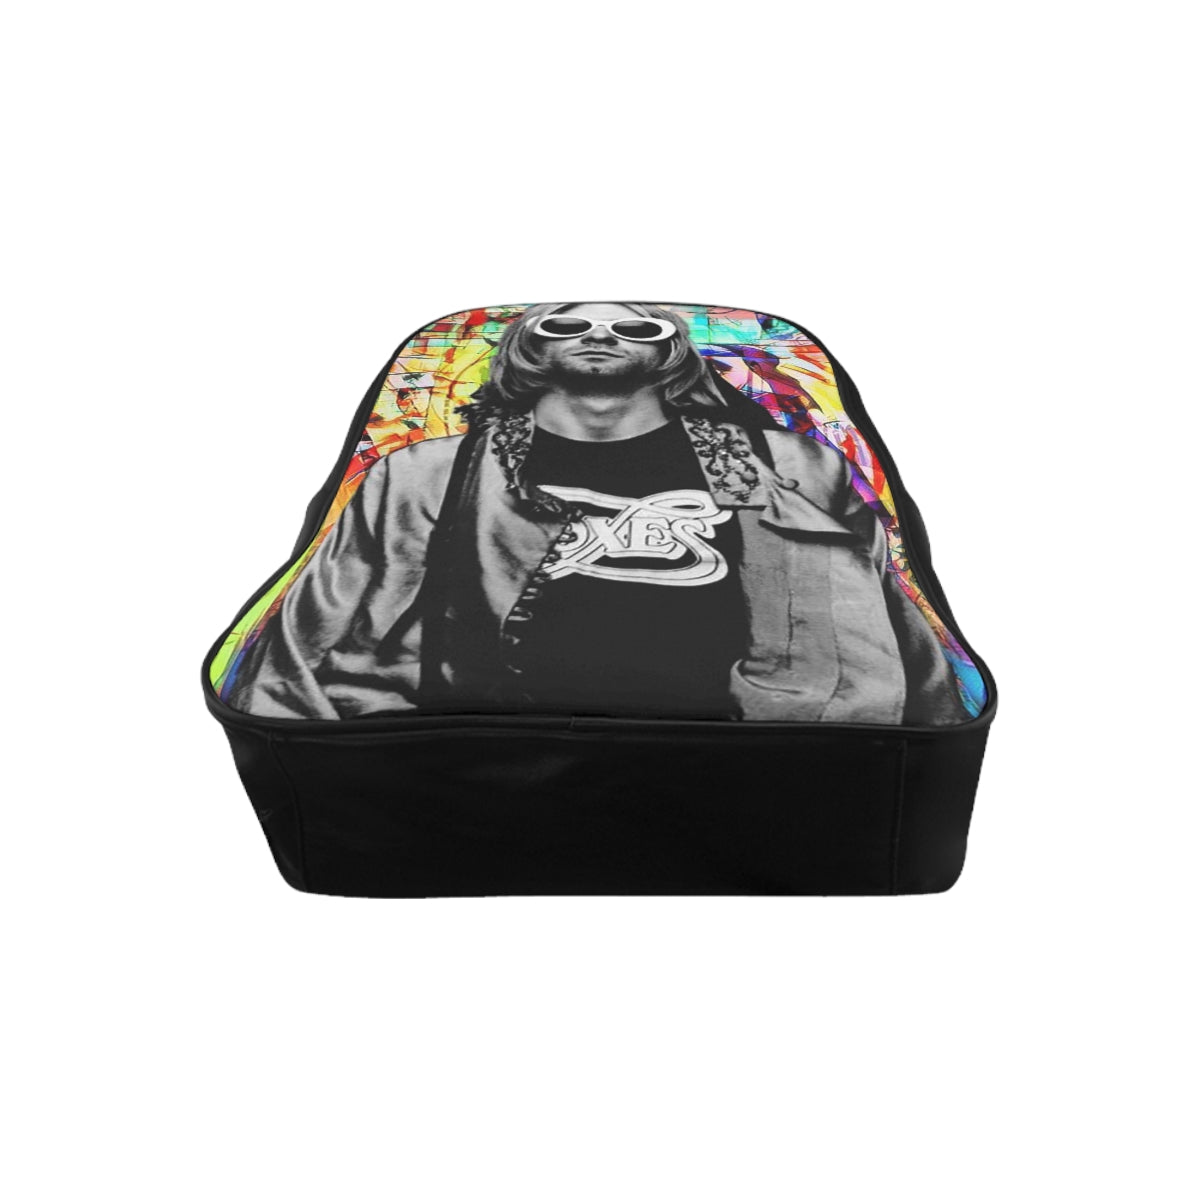 Getrott Nirvana Graffiti Poster PU leather School Backpack Carry-On Travel Check Luggage 4-Wheel Spinner Suitcase Bag Multiple Colors and Sizes-Bags-Geotrott